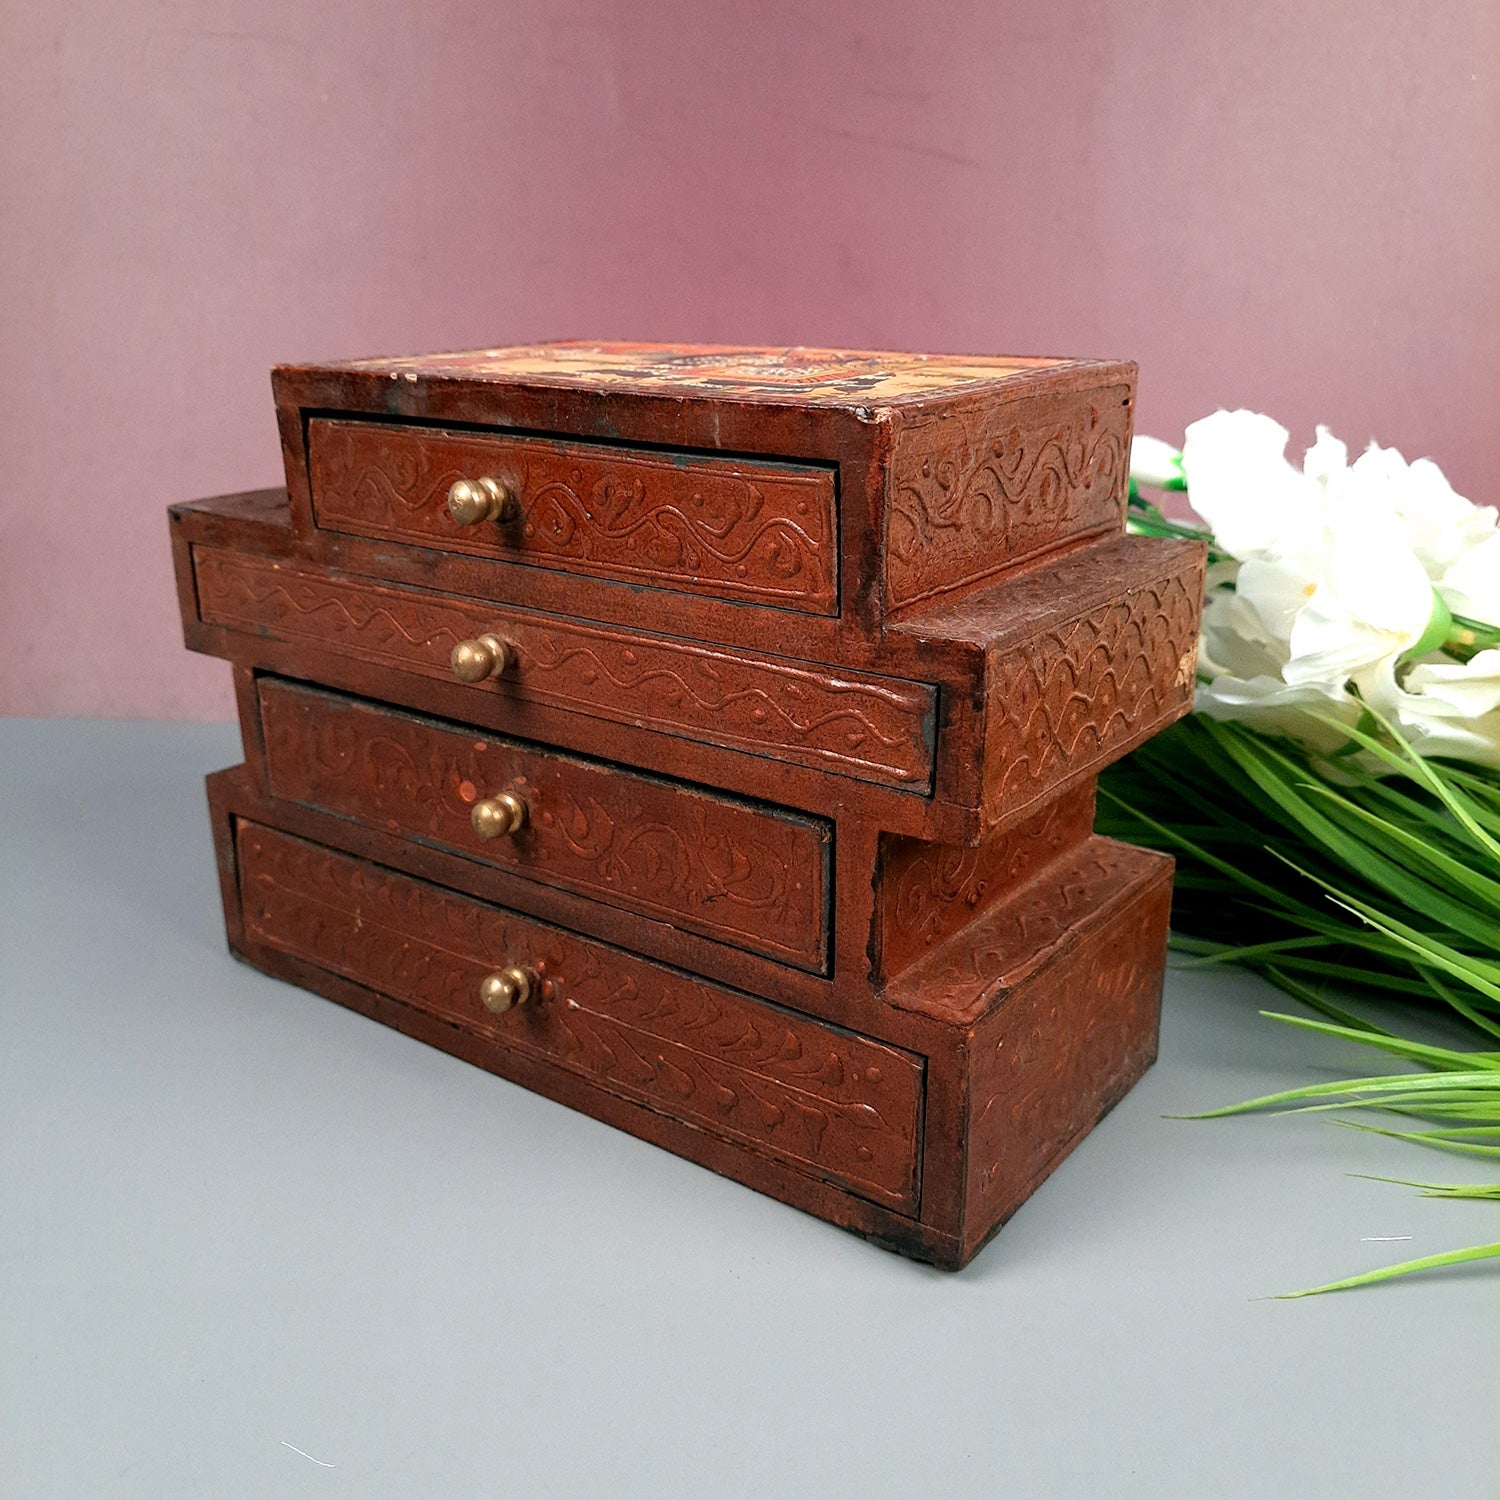 Jewellery Box | Decorative Wooden Jewelry Box - For Earring, Necklace & Gifts - 7 Inch - Apkamart